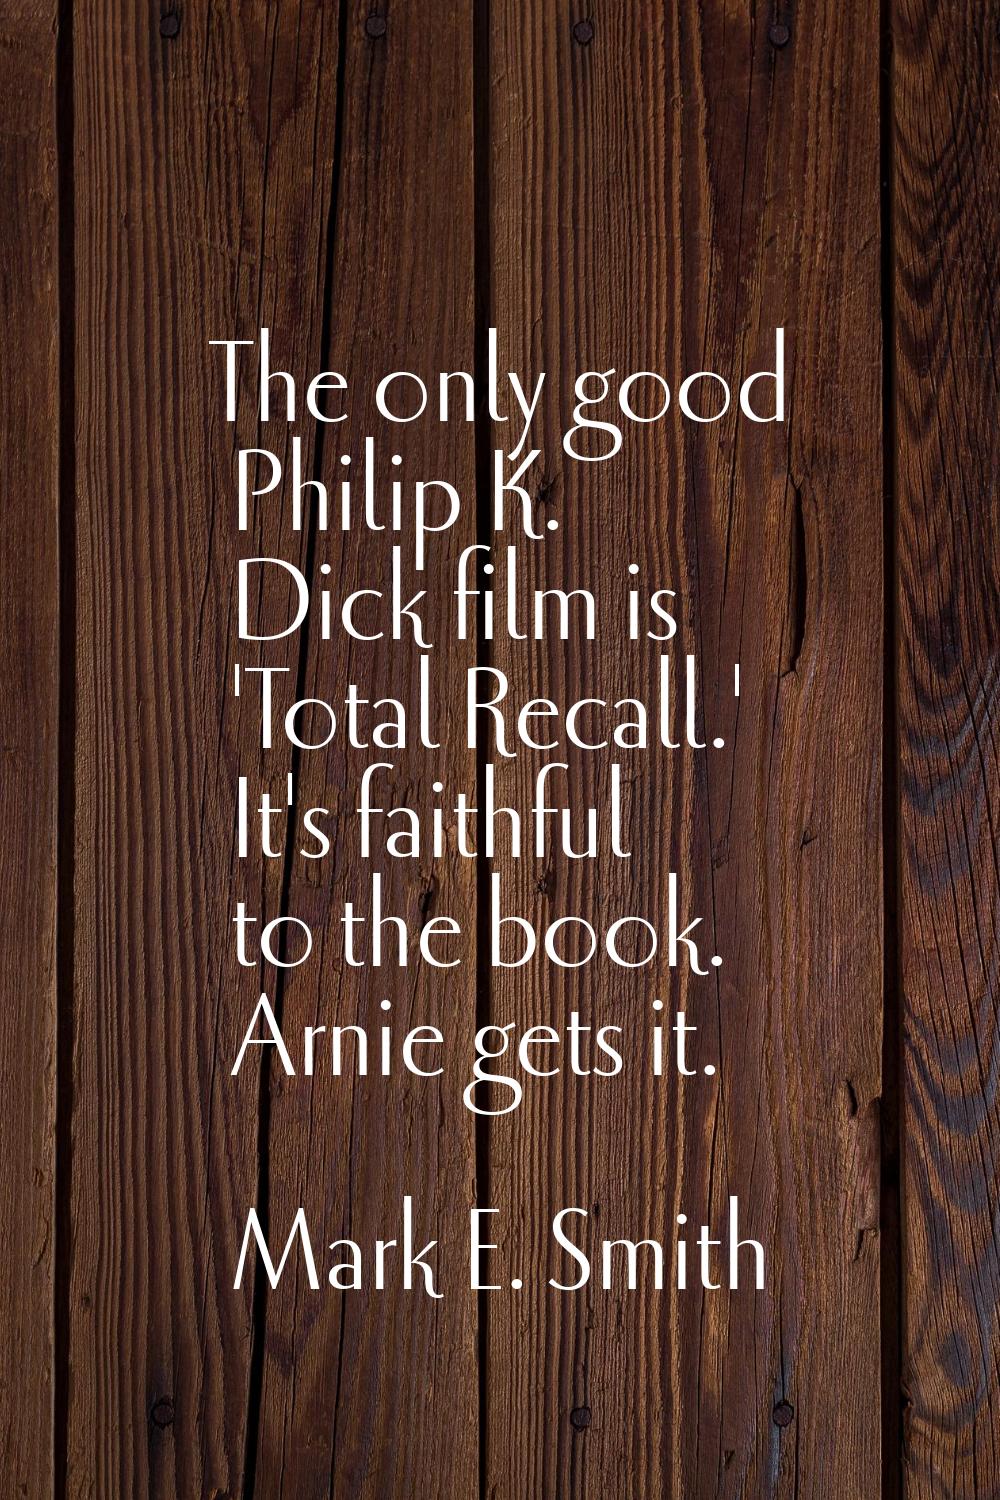 The only good Philip K. Dick film is 'Total Recall.' It's faithful to the book. Arnie gets it.